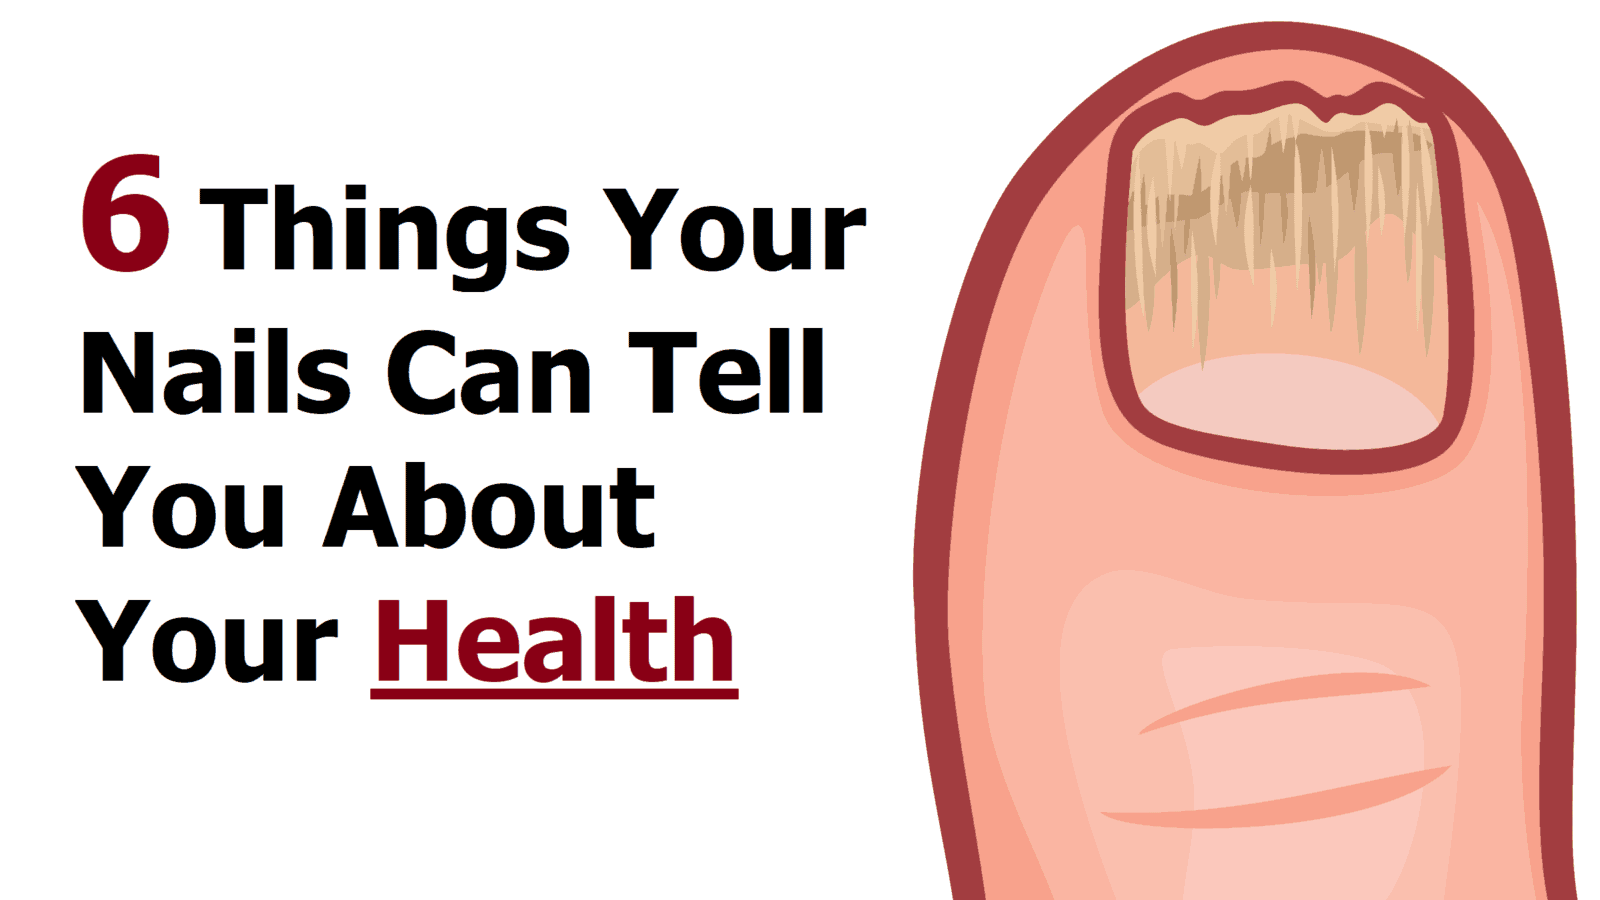 6 Things Your Nails Can Tell You About Your Health